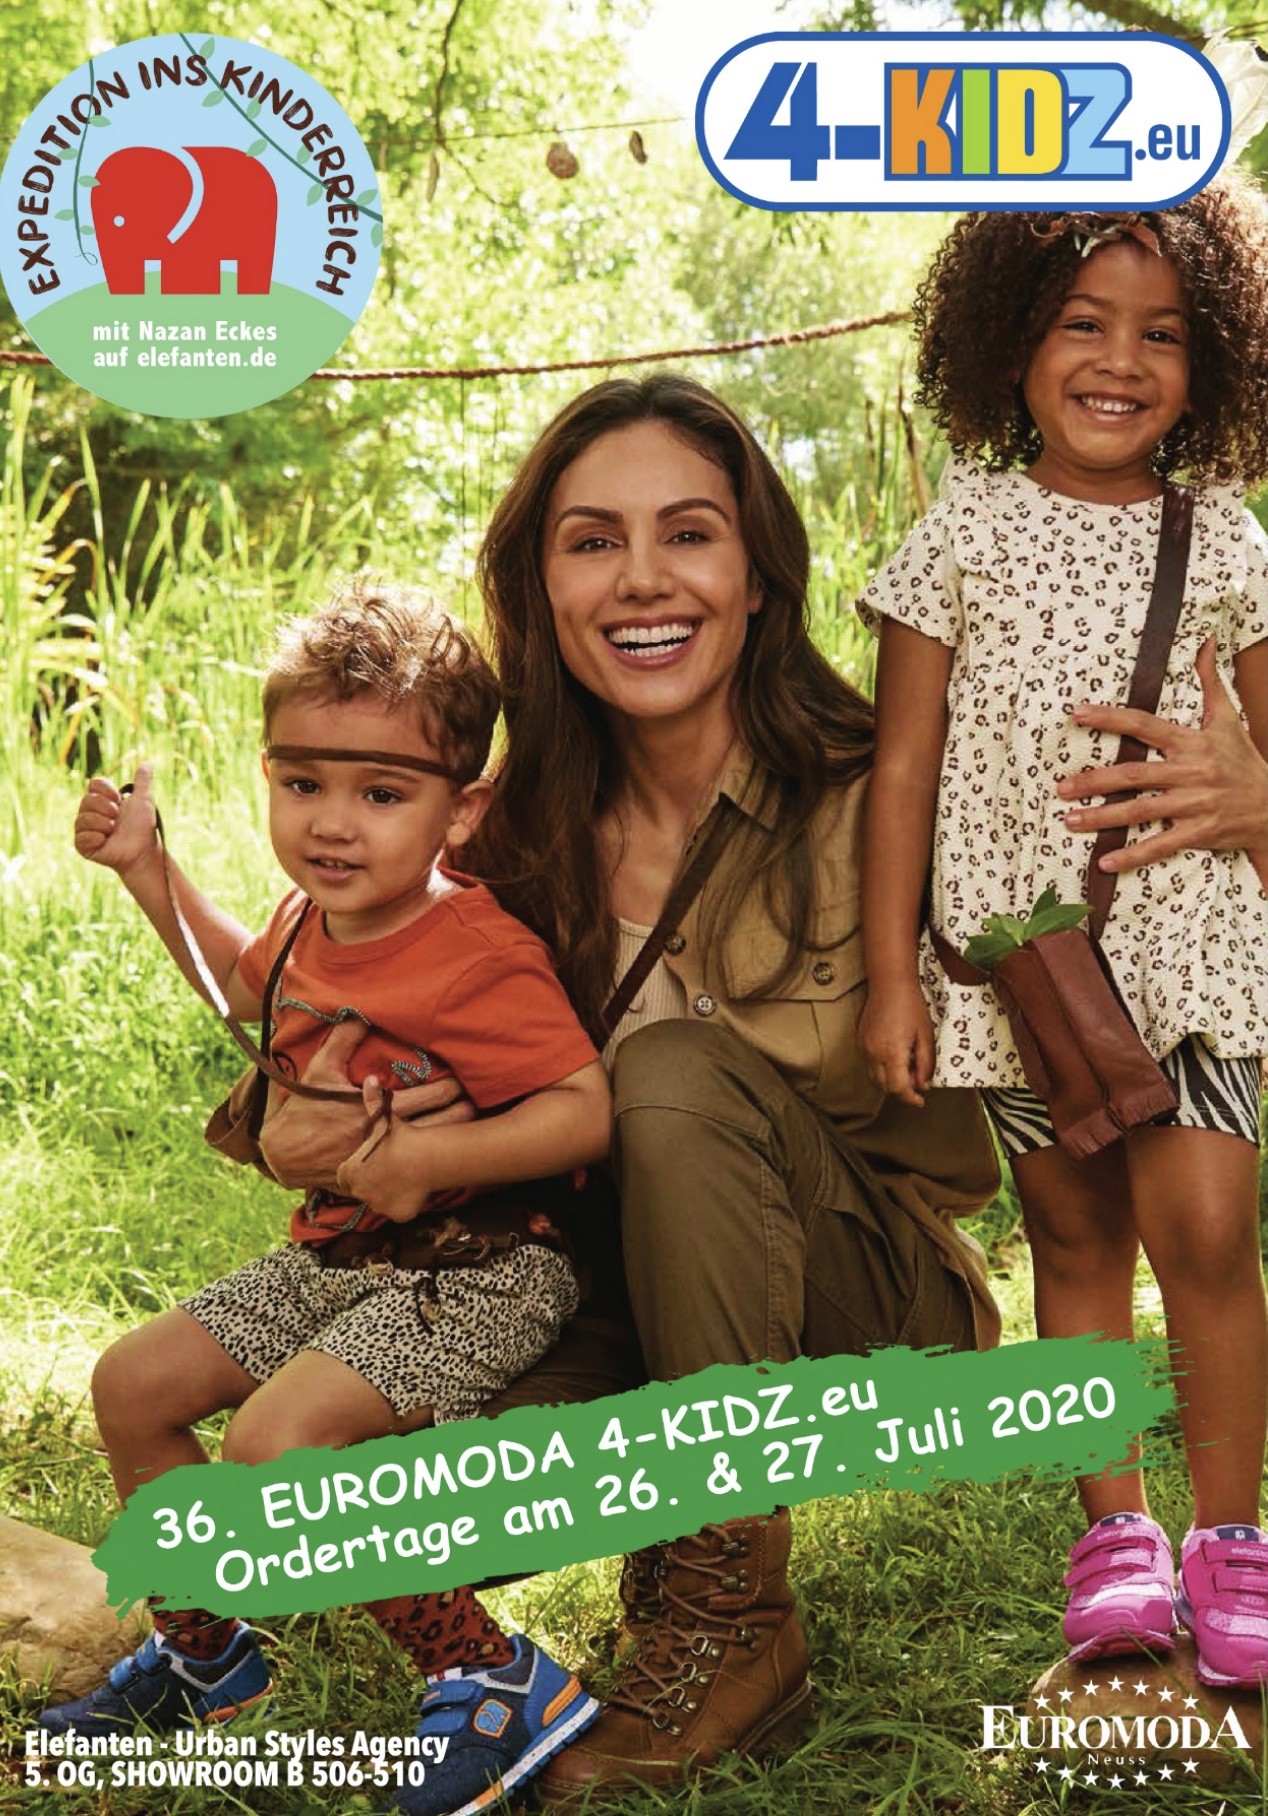 Cover of the 4-kidz.eu catalogue for the order round in summer 2020